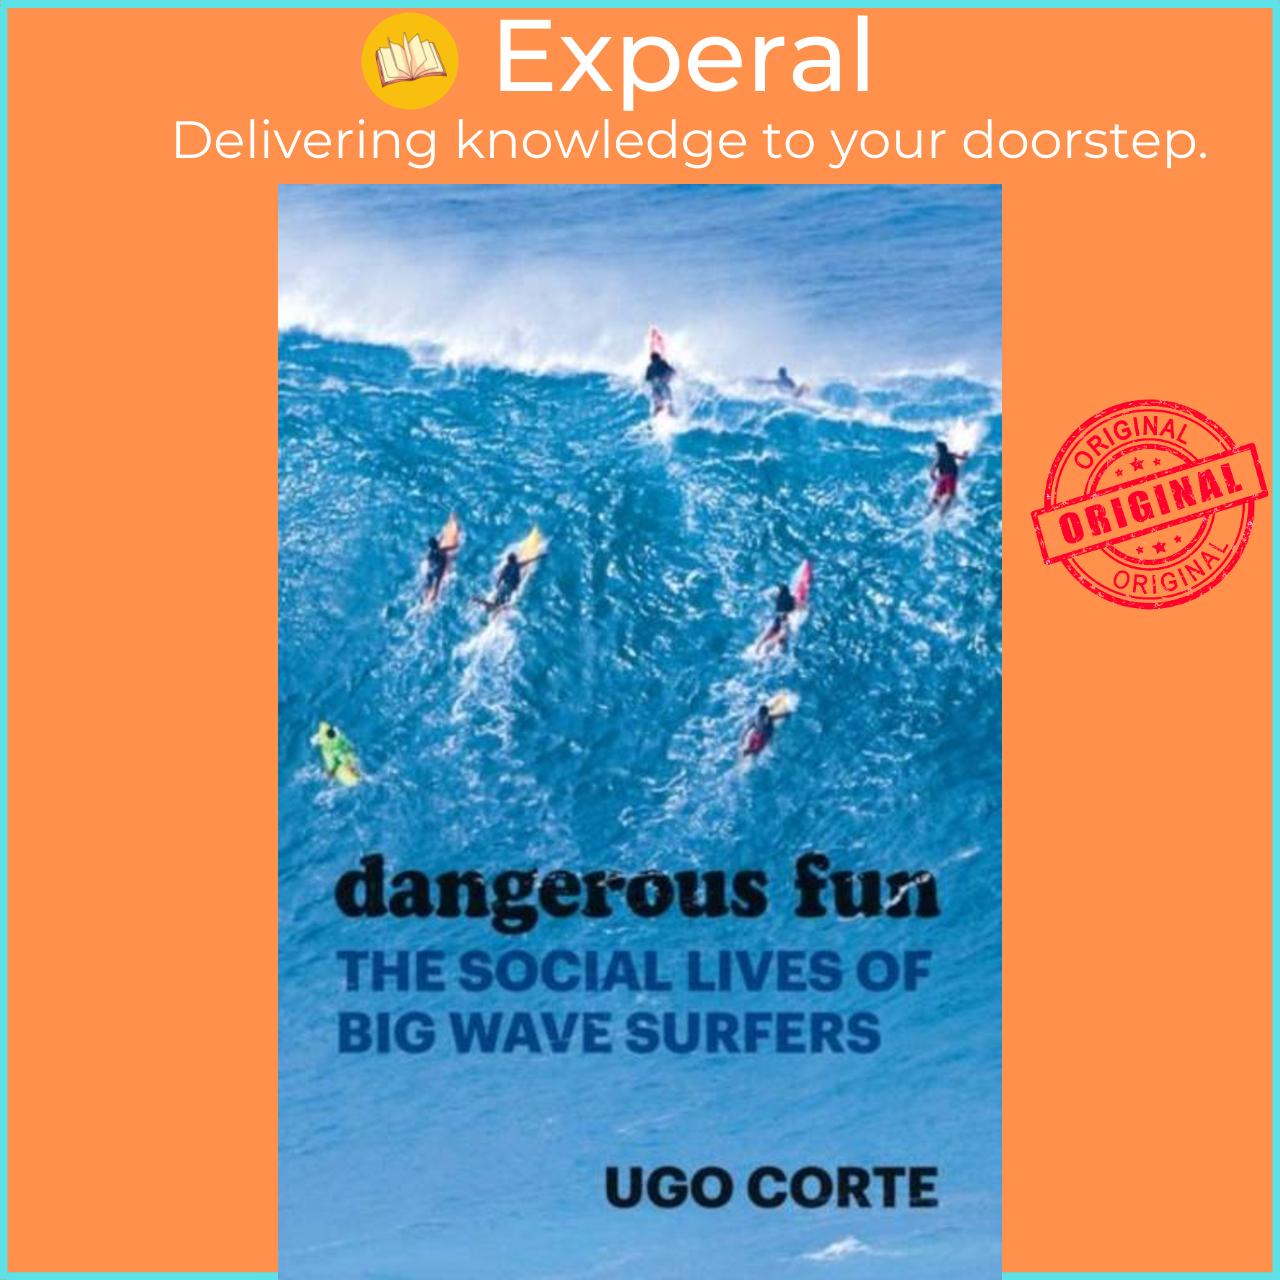 Sách - Dangerous Fun - The Social Lives of Big Wave Surfers by Ugo Corte (UK edition, hardcover)